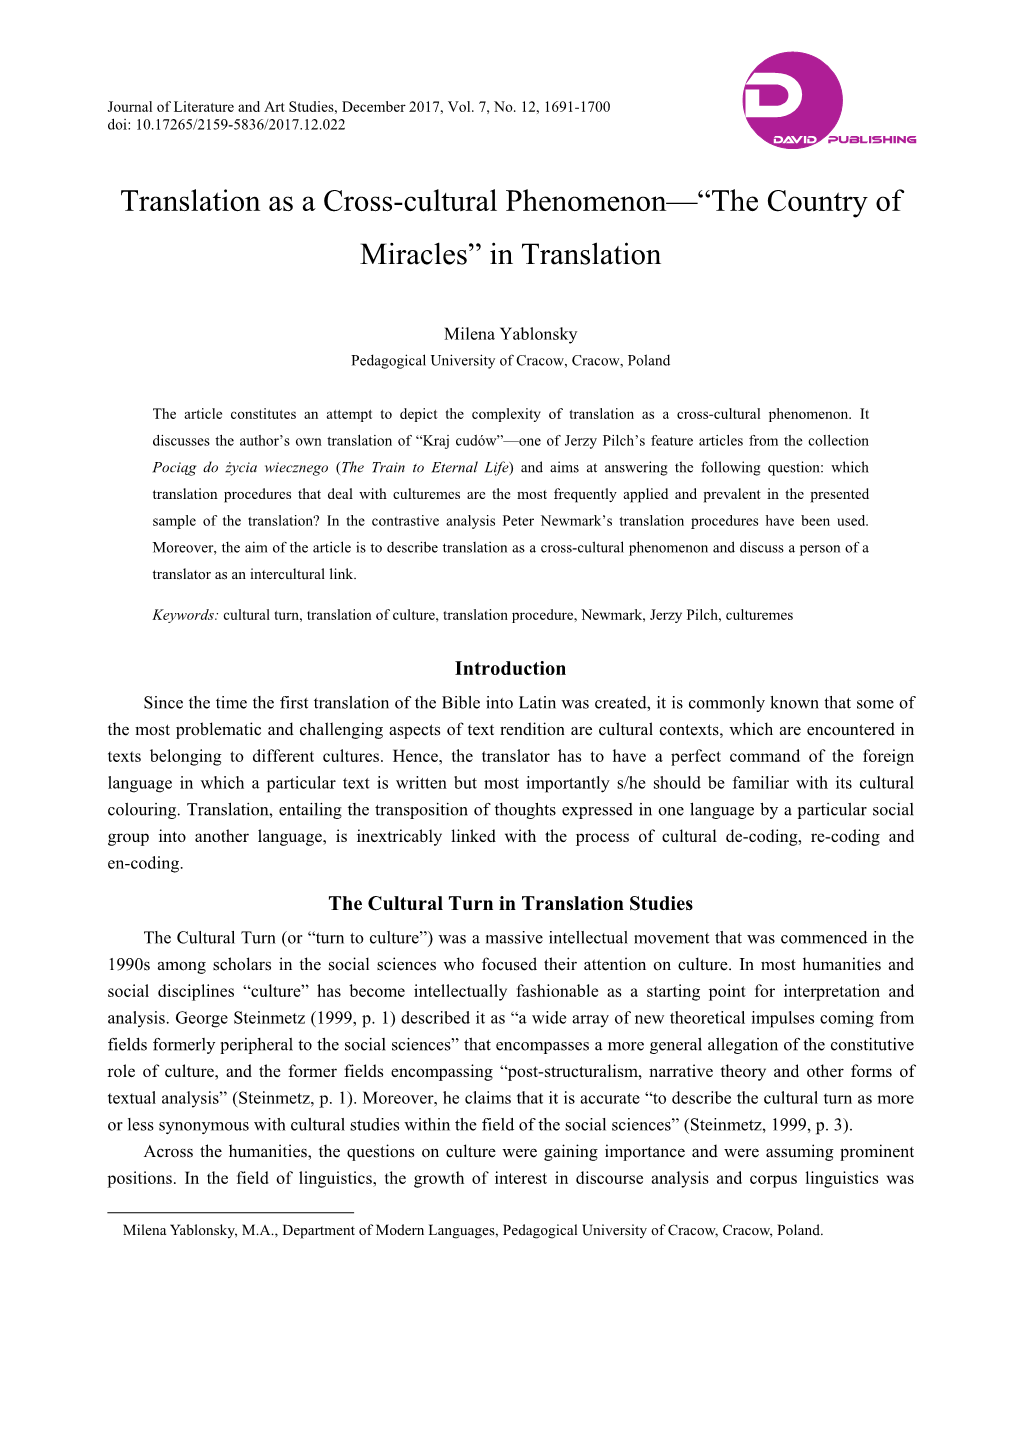 Translation As a Cross-Cultural Phenomenon—“The Country of Miracles” in Translation